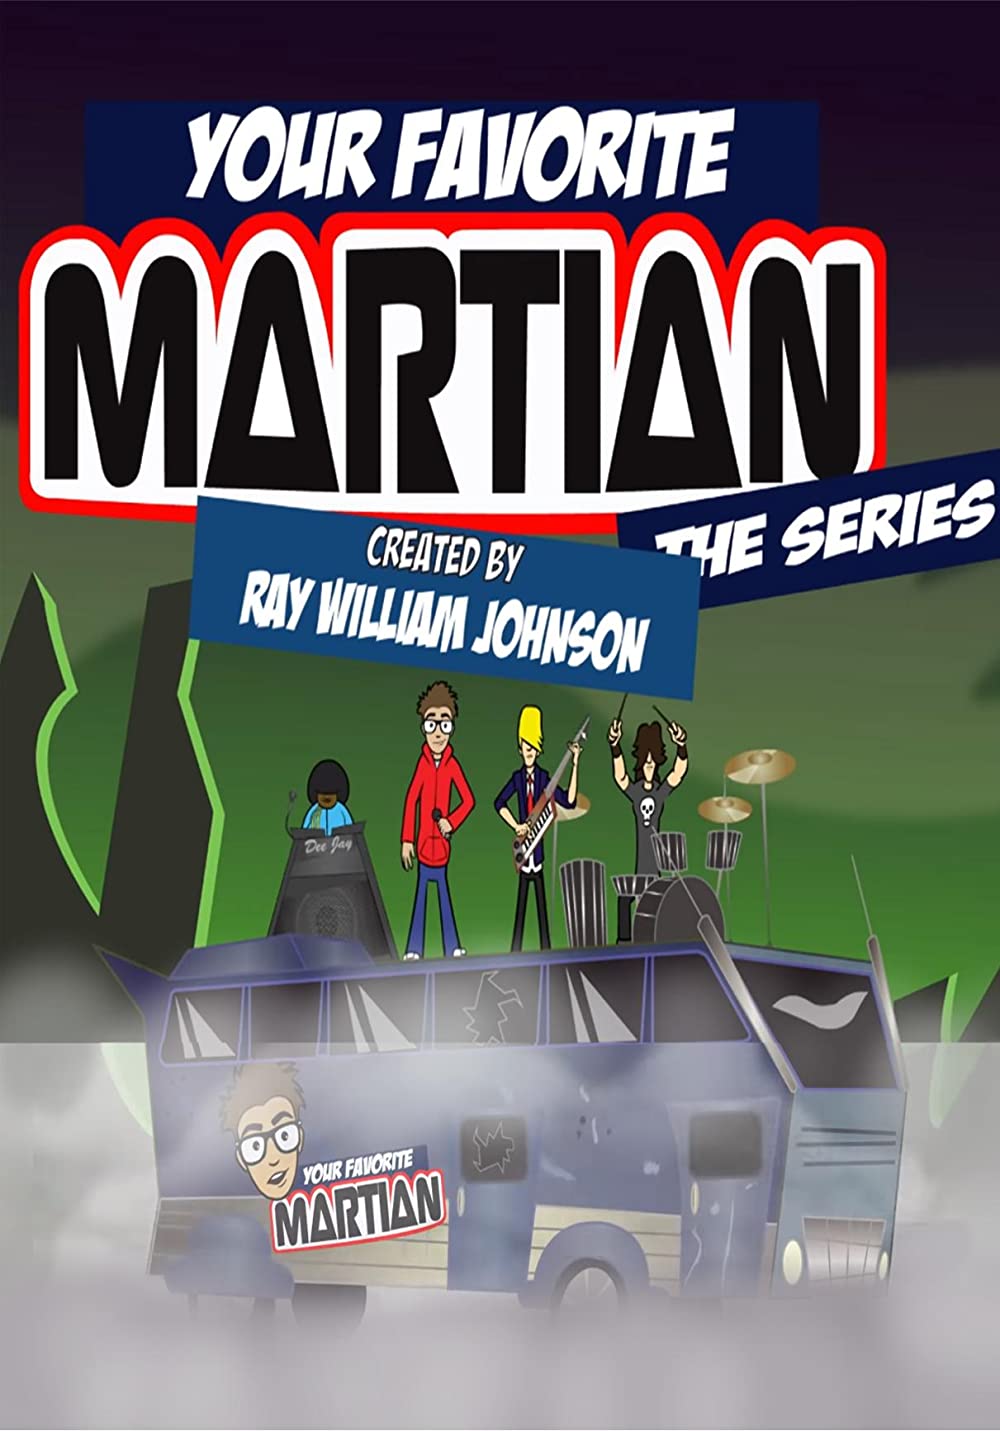 Your Favorite Martian: The Series (TV Series 2011– )